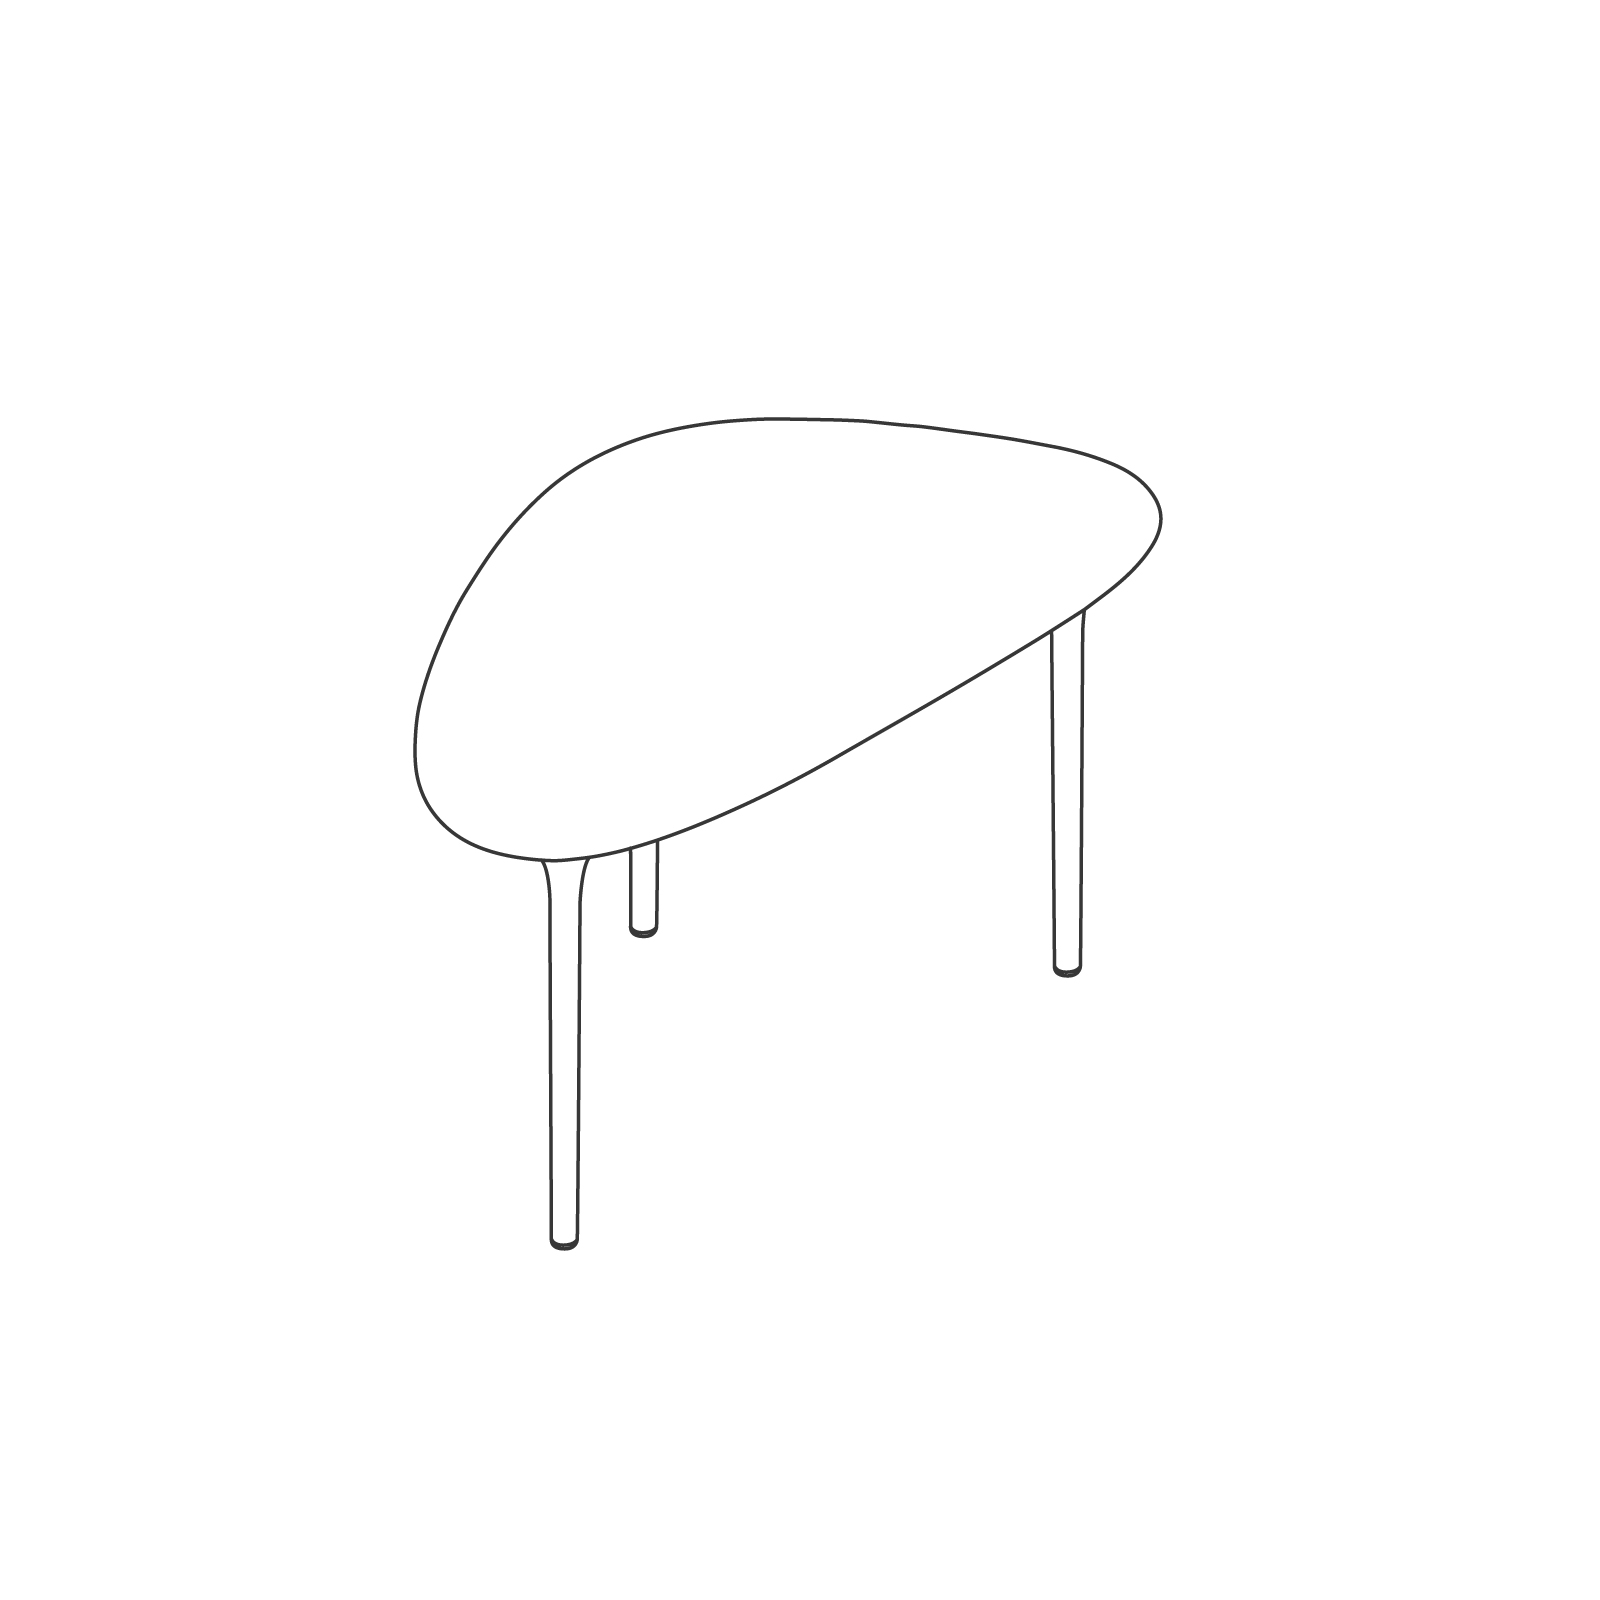 A line drawing - Cyclade Table–Tall